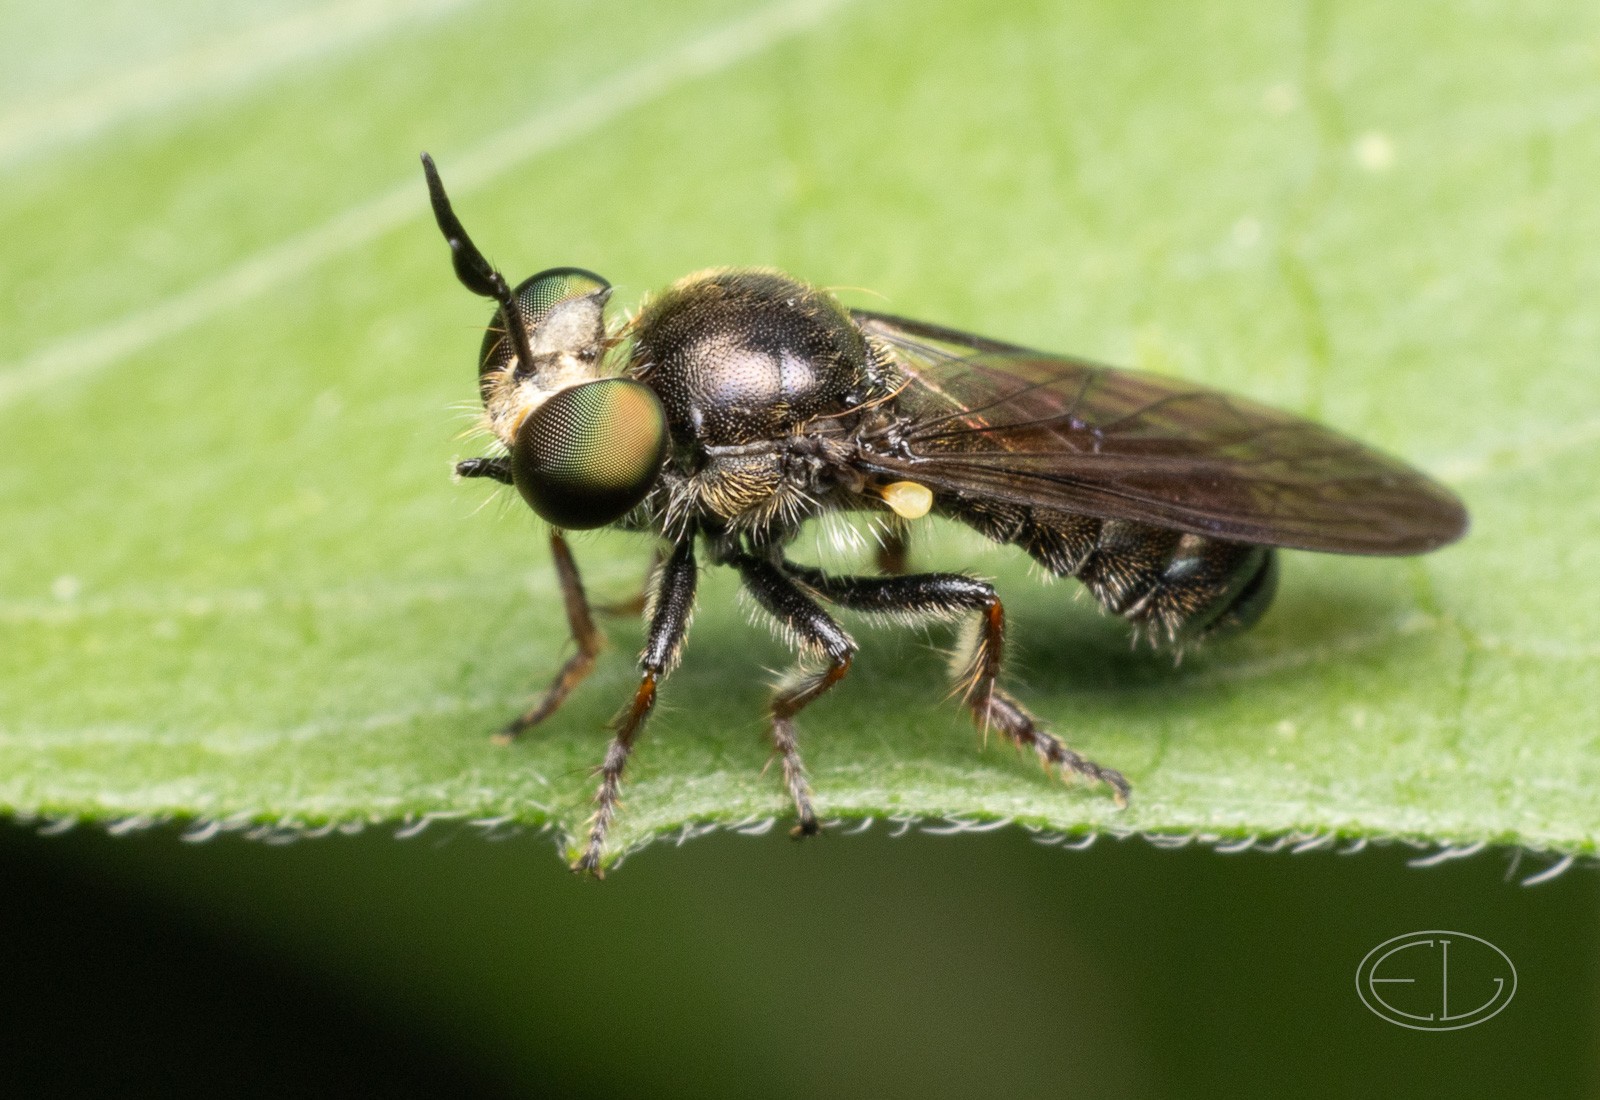 R7_D4668 White-faced Micropanther, a robber fly, Cerotainia sp.jpg